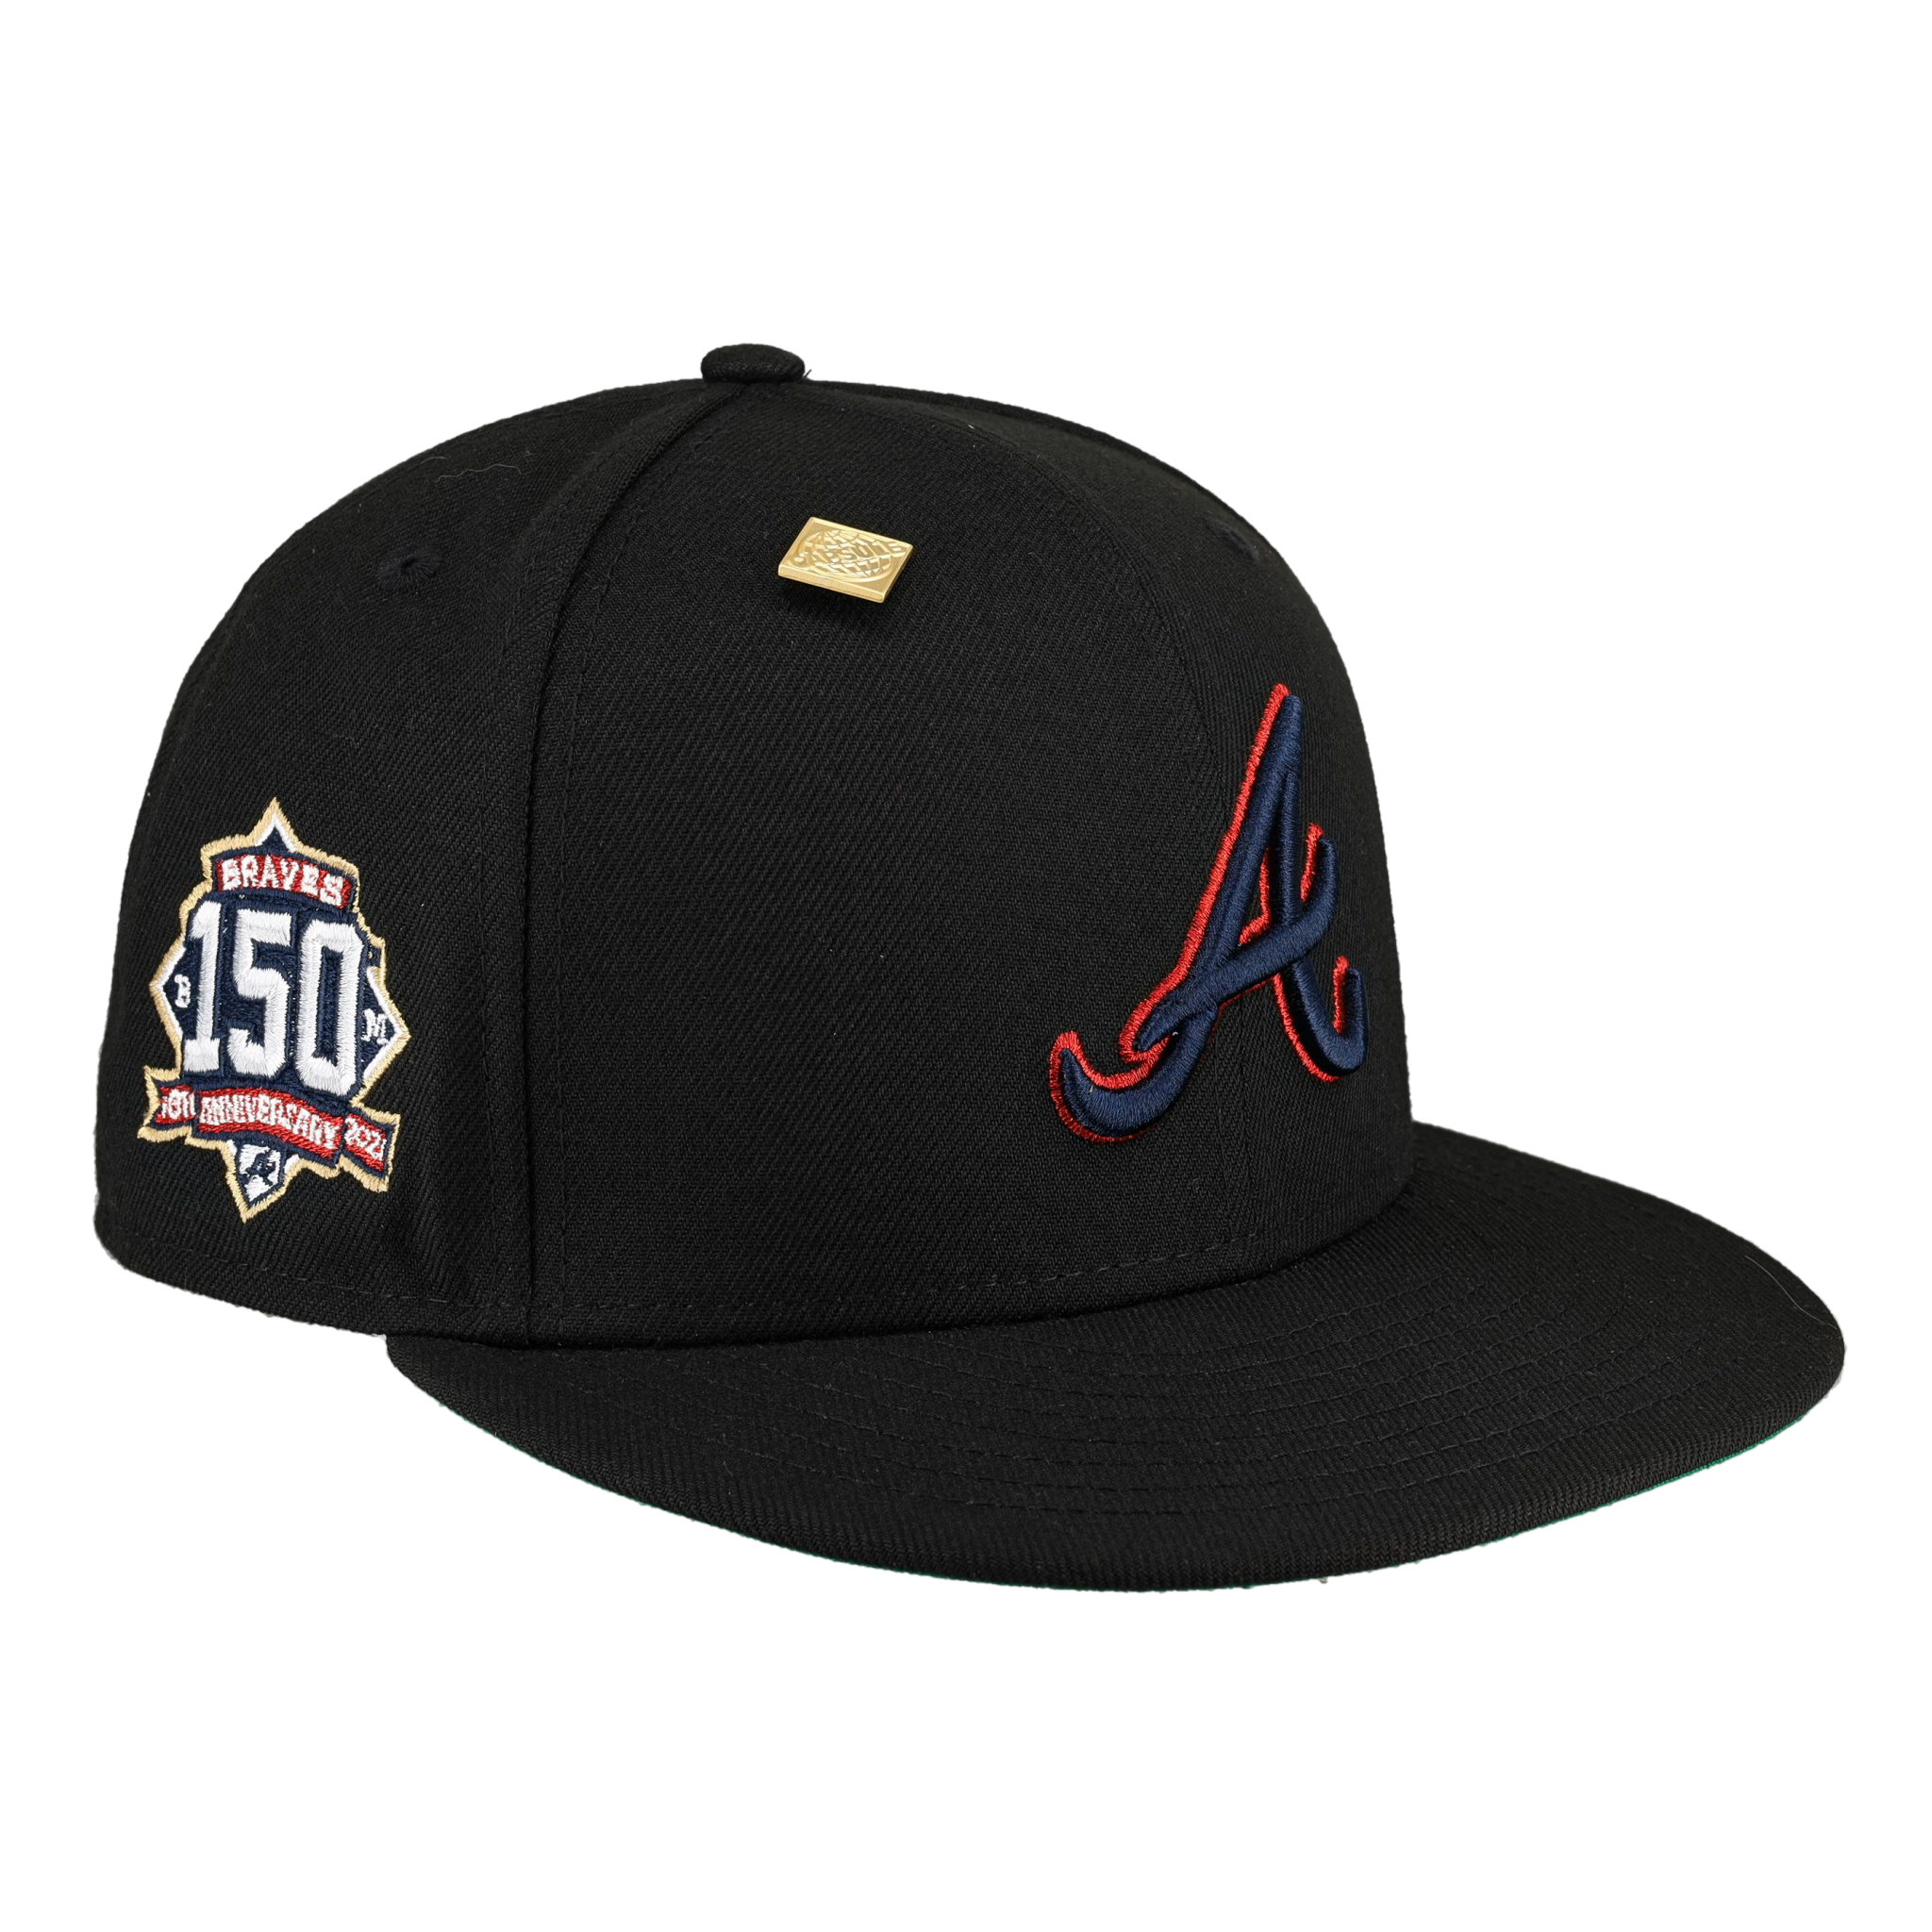 Atlanta Braves 150th Anniversary Patch Metallic Stitch Collection Fitted Hat 7 3/8